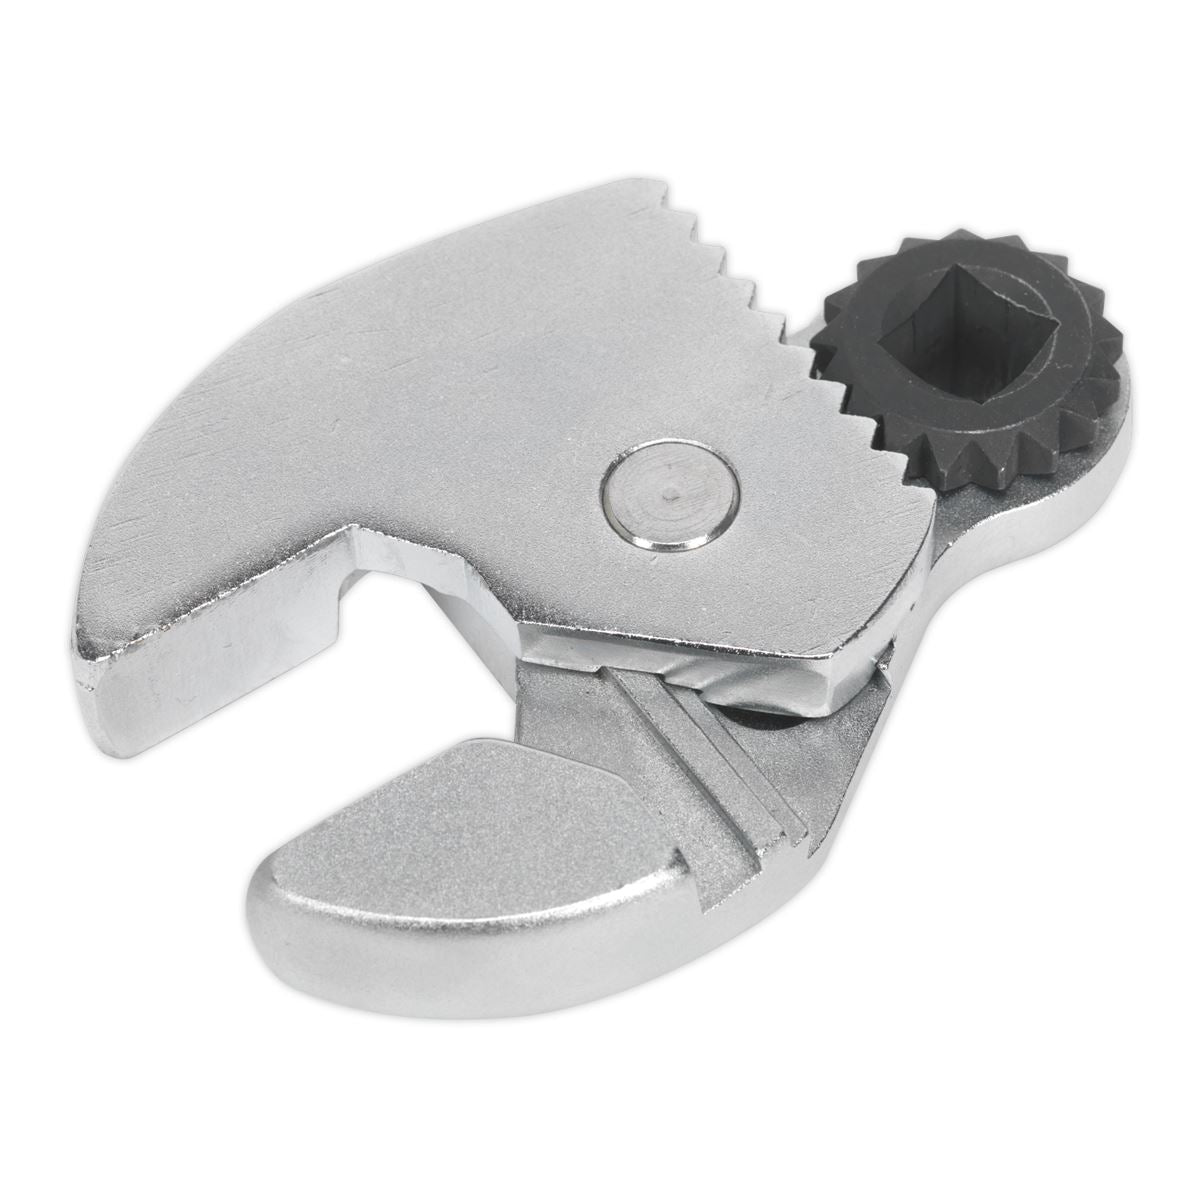 Sealey Premier Crow's Foot Wrench Adjustable 3/8"Sq Drive 6-30mm